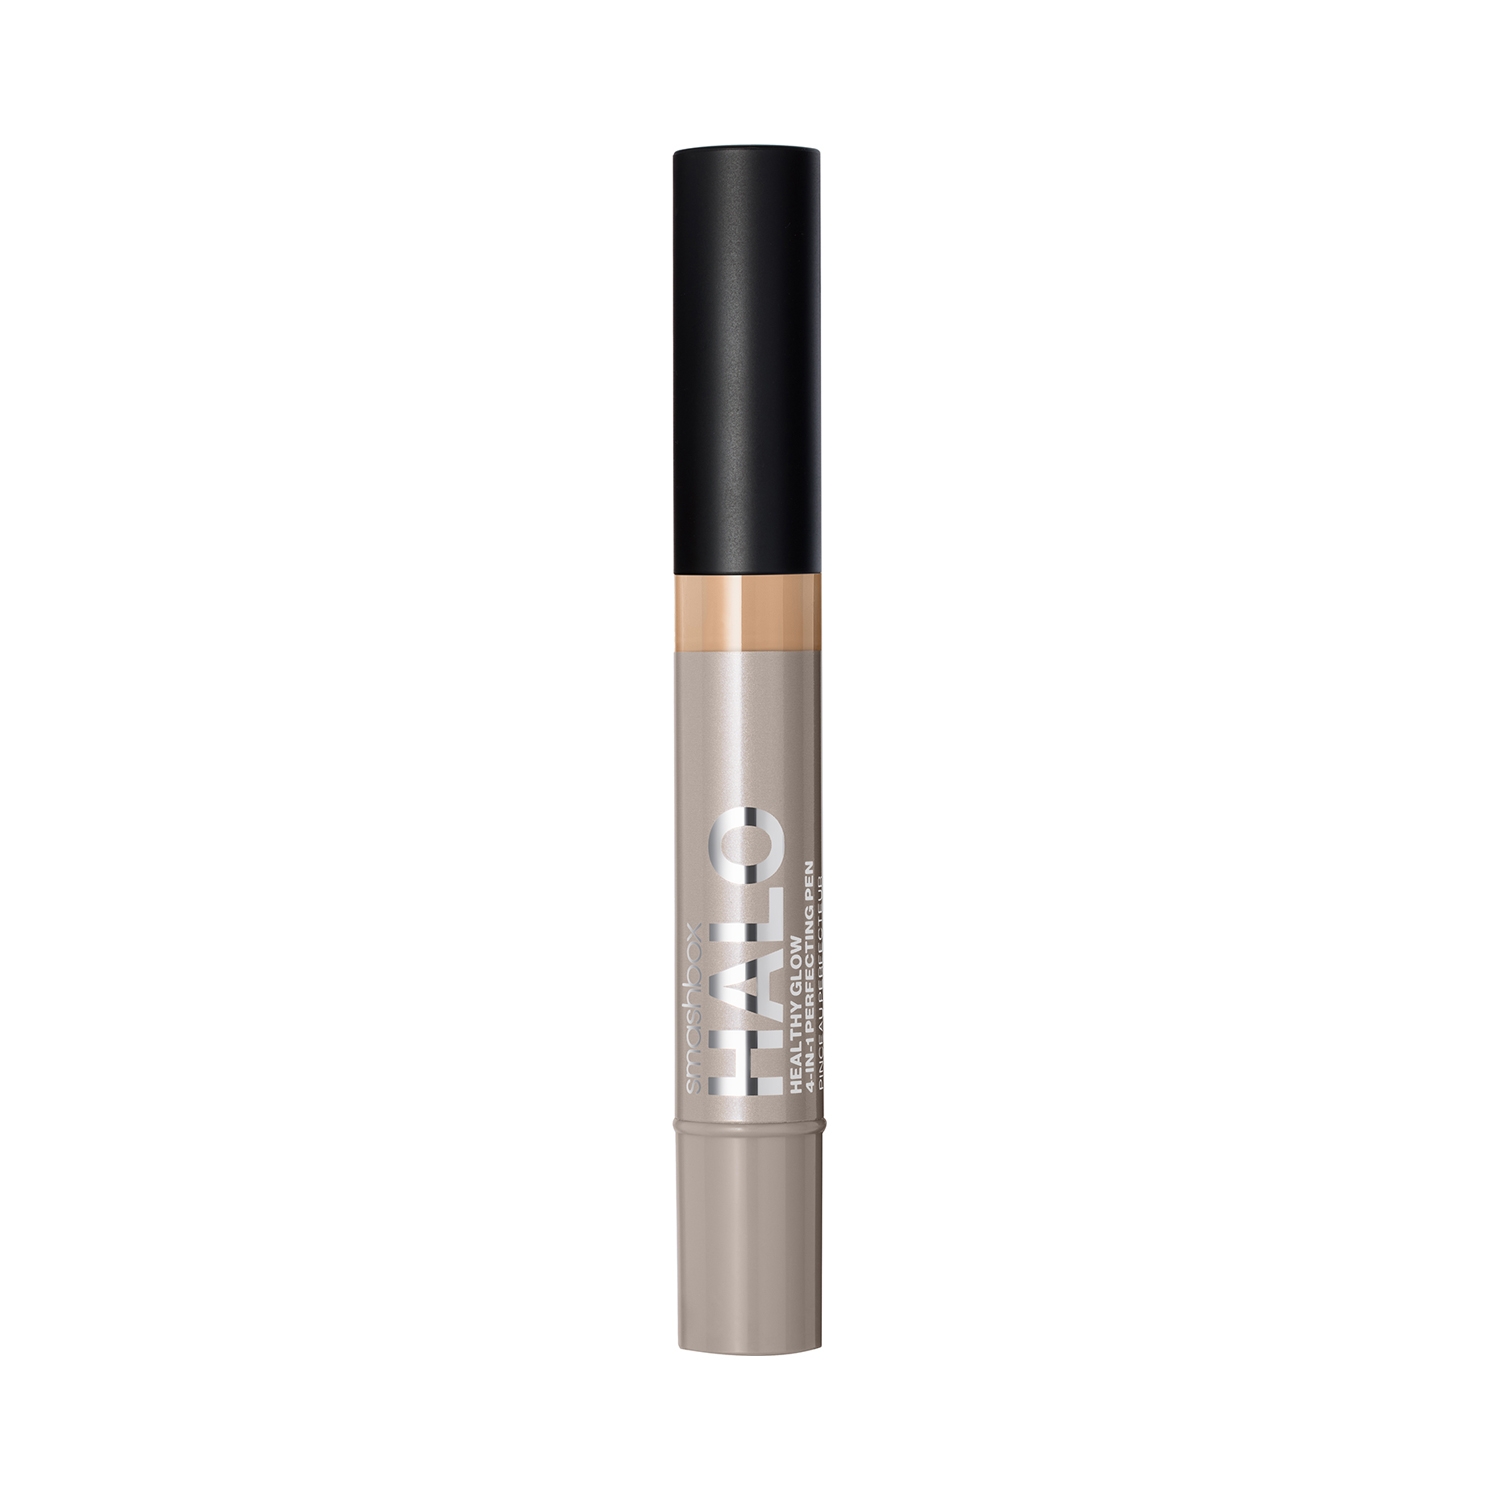 Smashbox | Smashbox Halo Healthy Glow 4-In-1 Perfecting Concealer Pen - L20N (3.5ml)